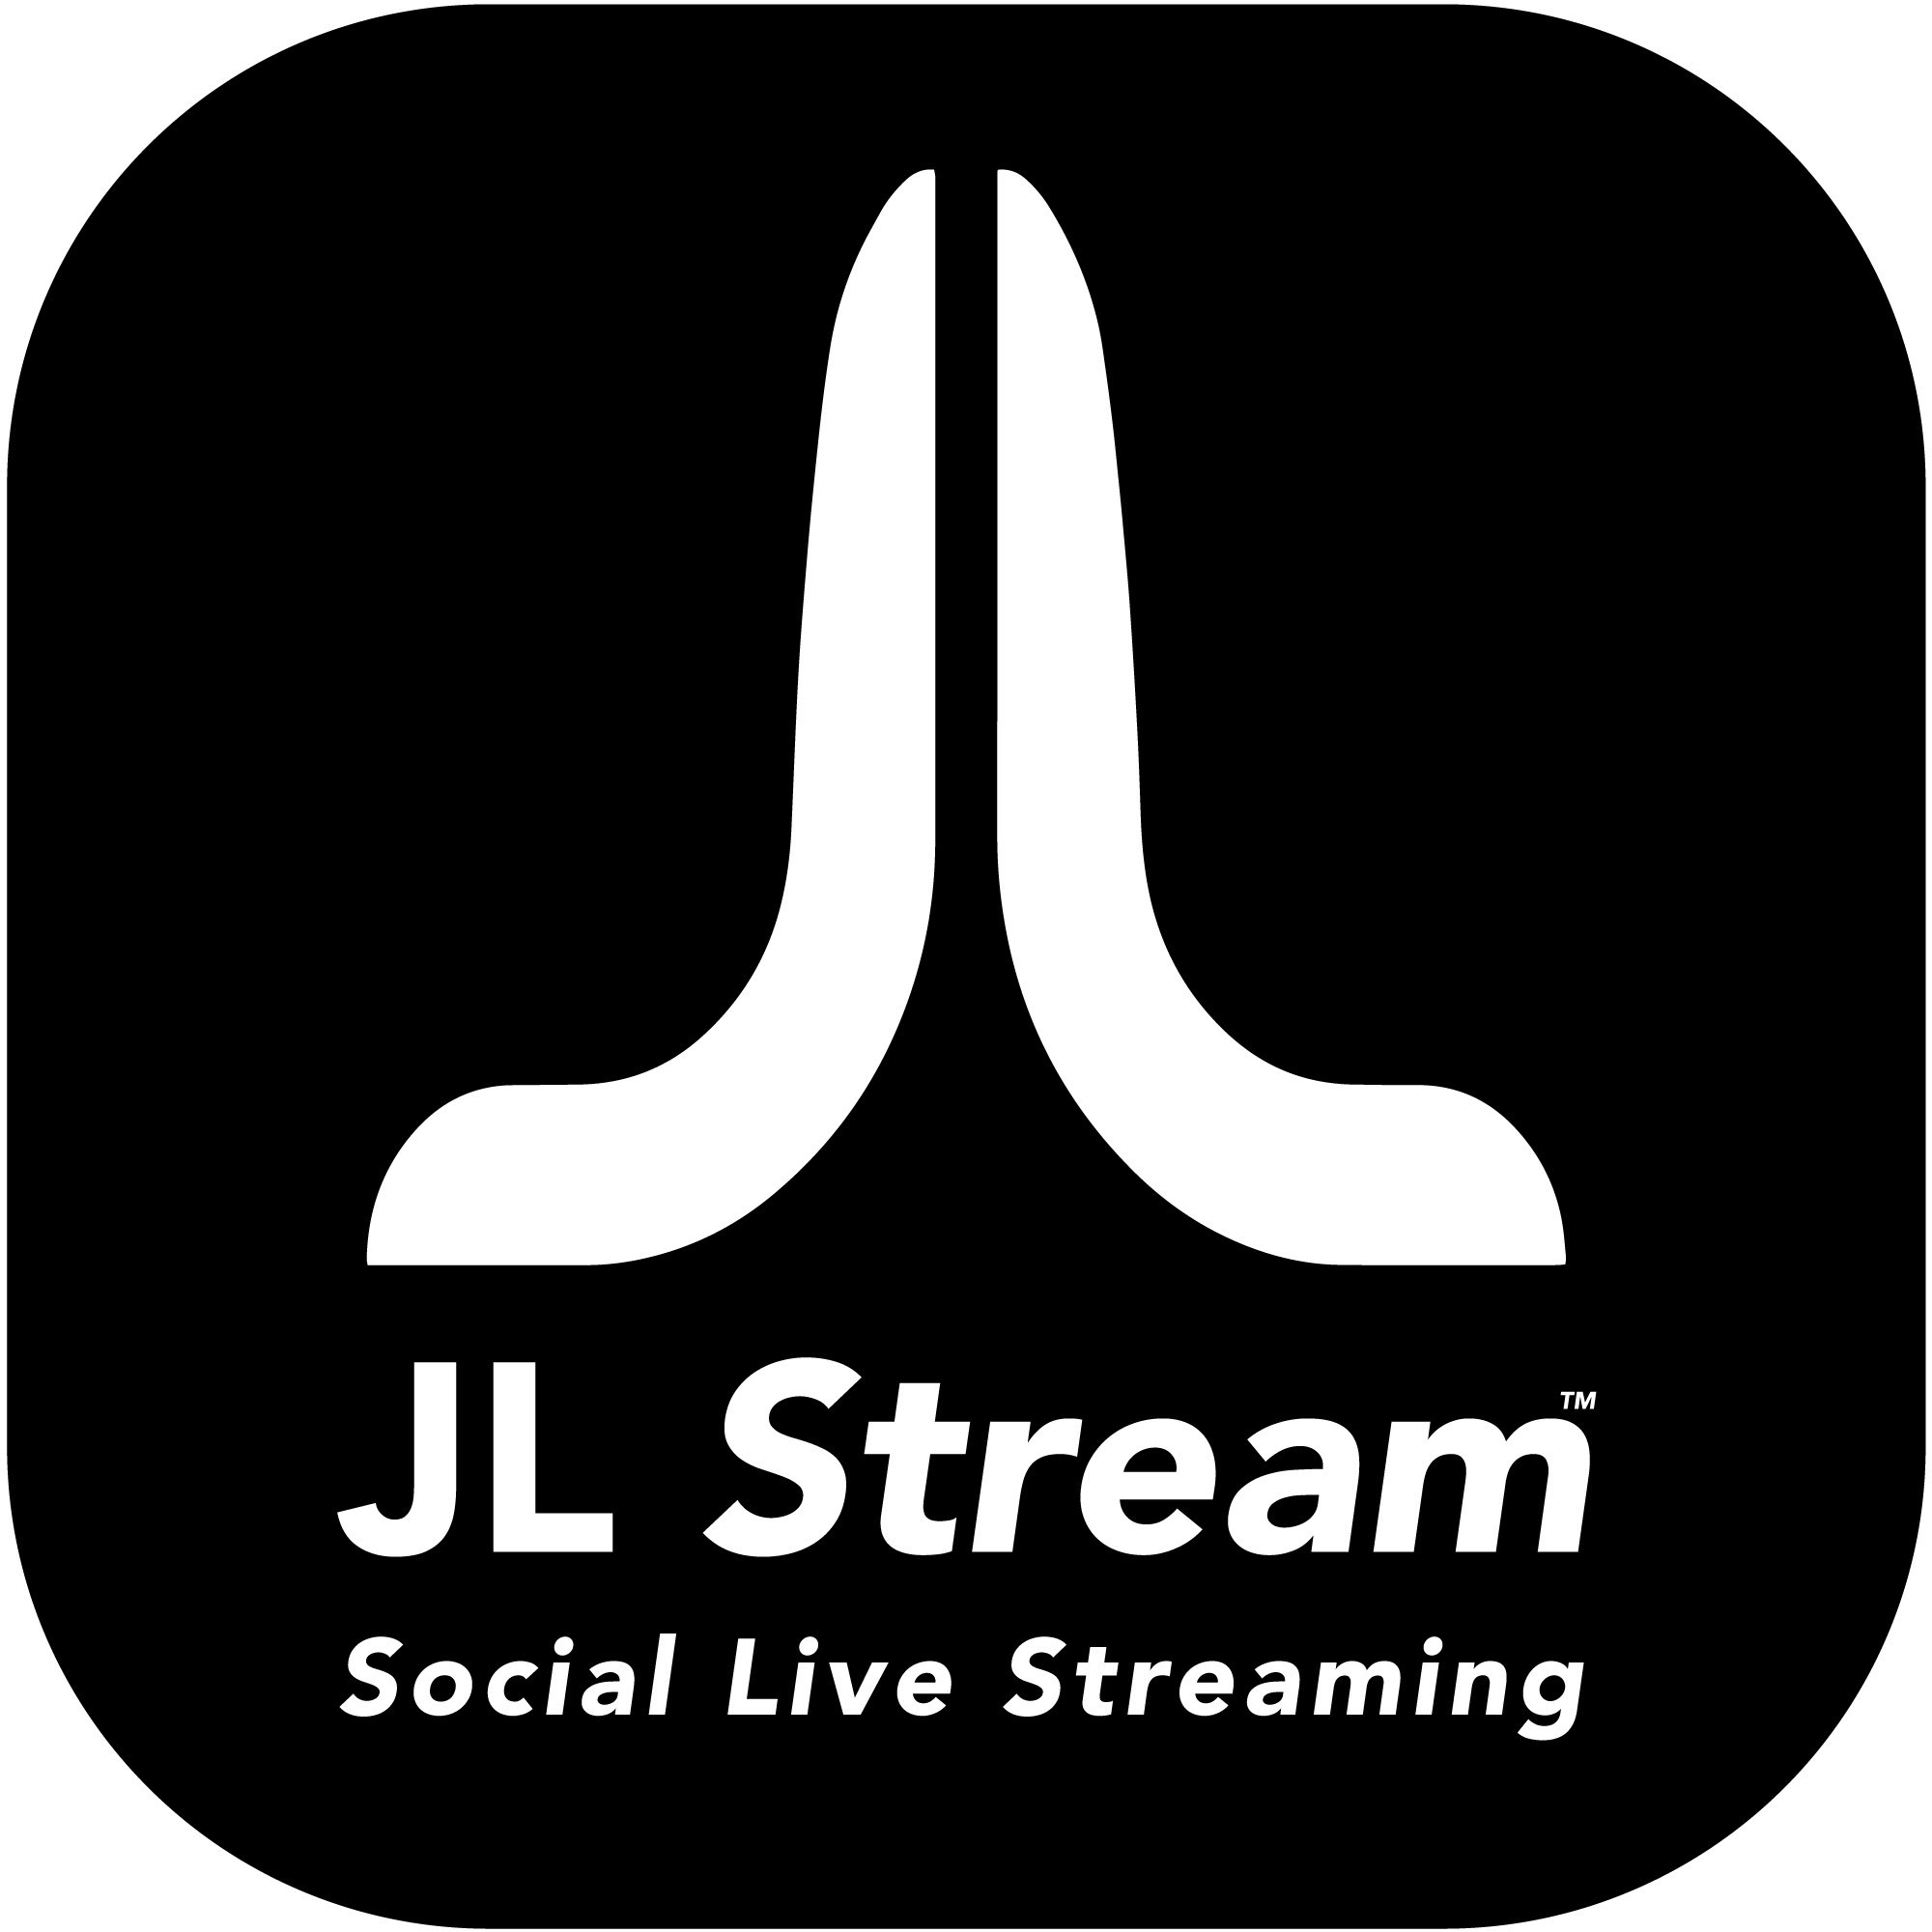 J L Stream Launches A Made In India Social Live Streaming App